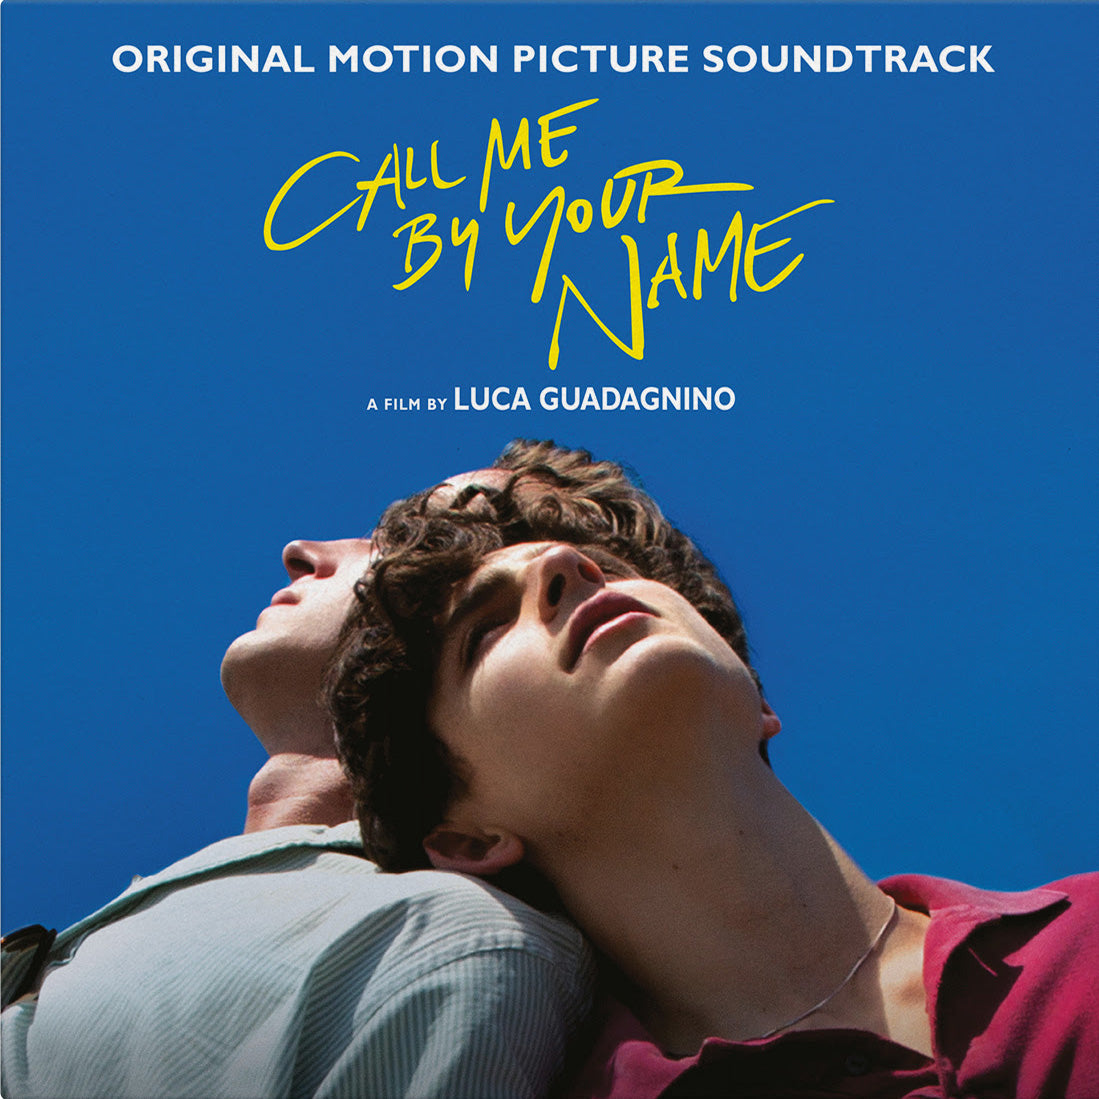 VARIOUS - Call Me By Your Name OST - 2LP - Translucent Pink Vinyl